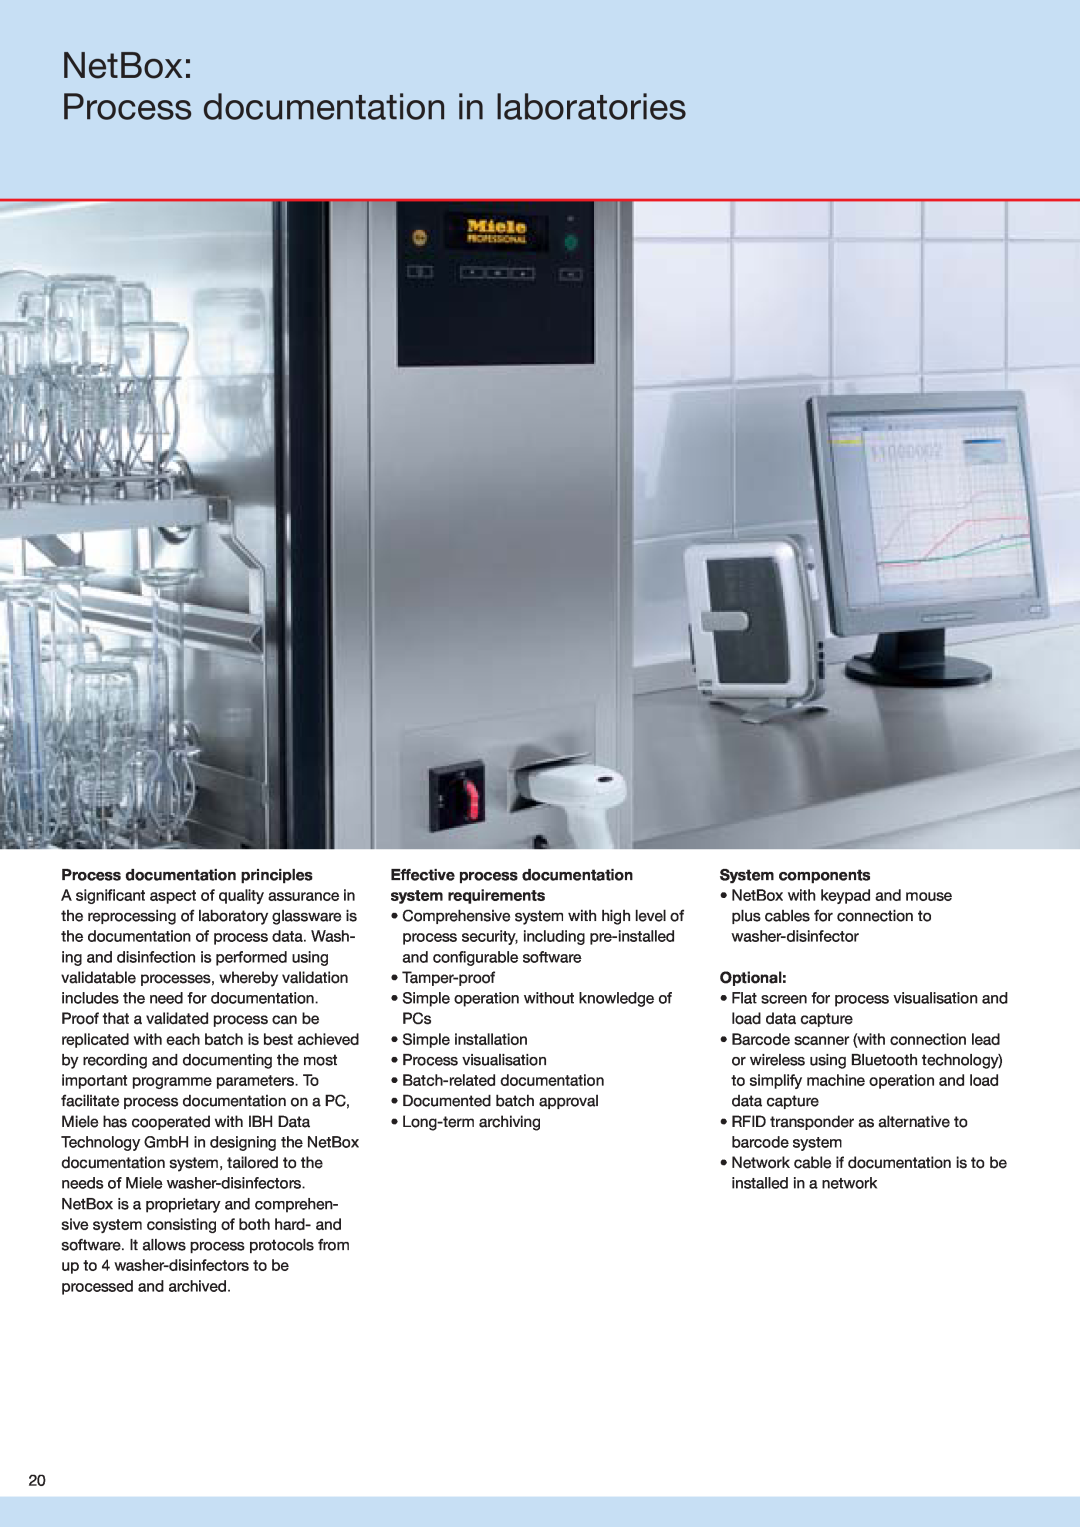 Miele G 7883 NetBox Process documentation in laboratories, Process documentation principles, System components, Optional 